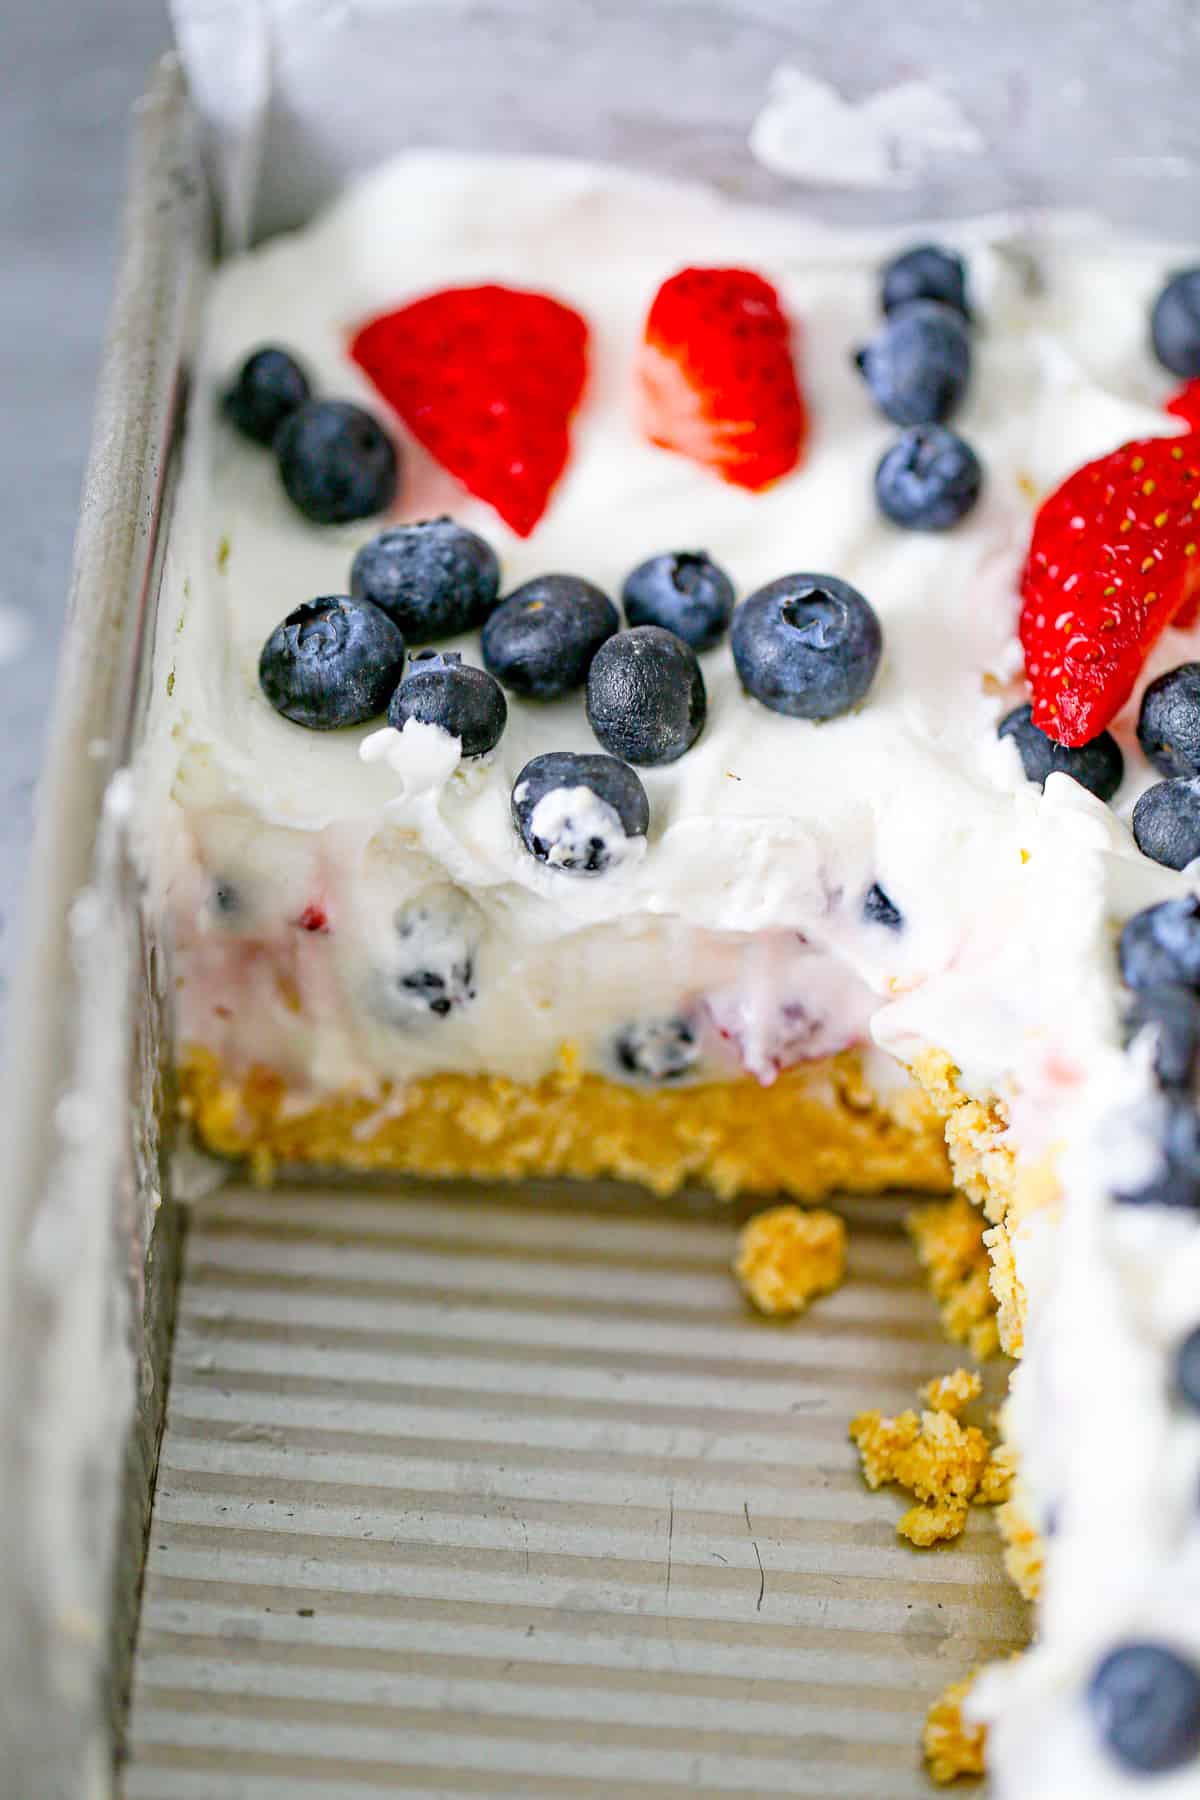 creamy dessert in a pan with fruit